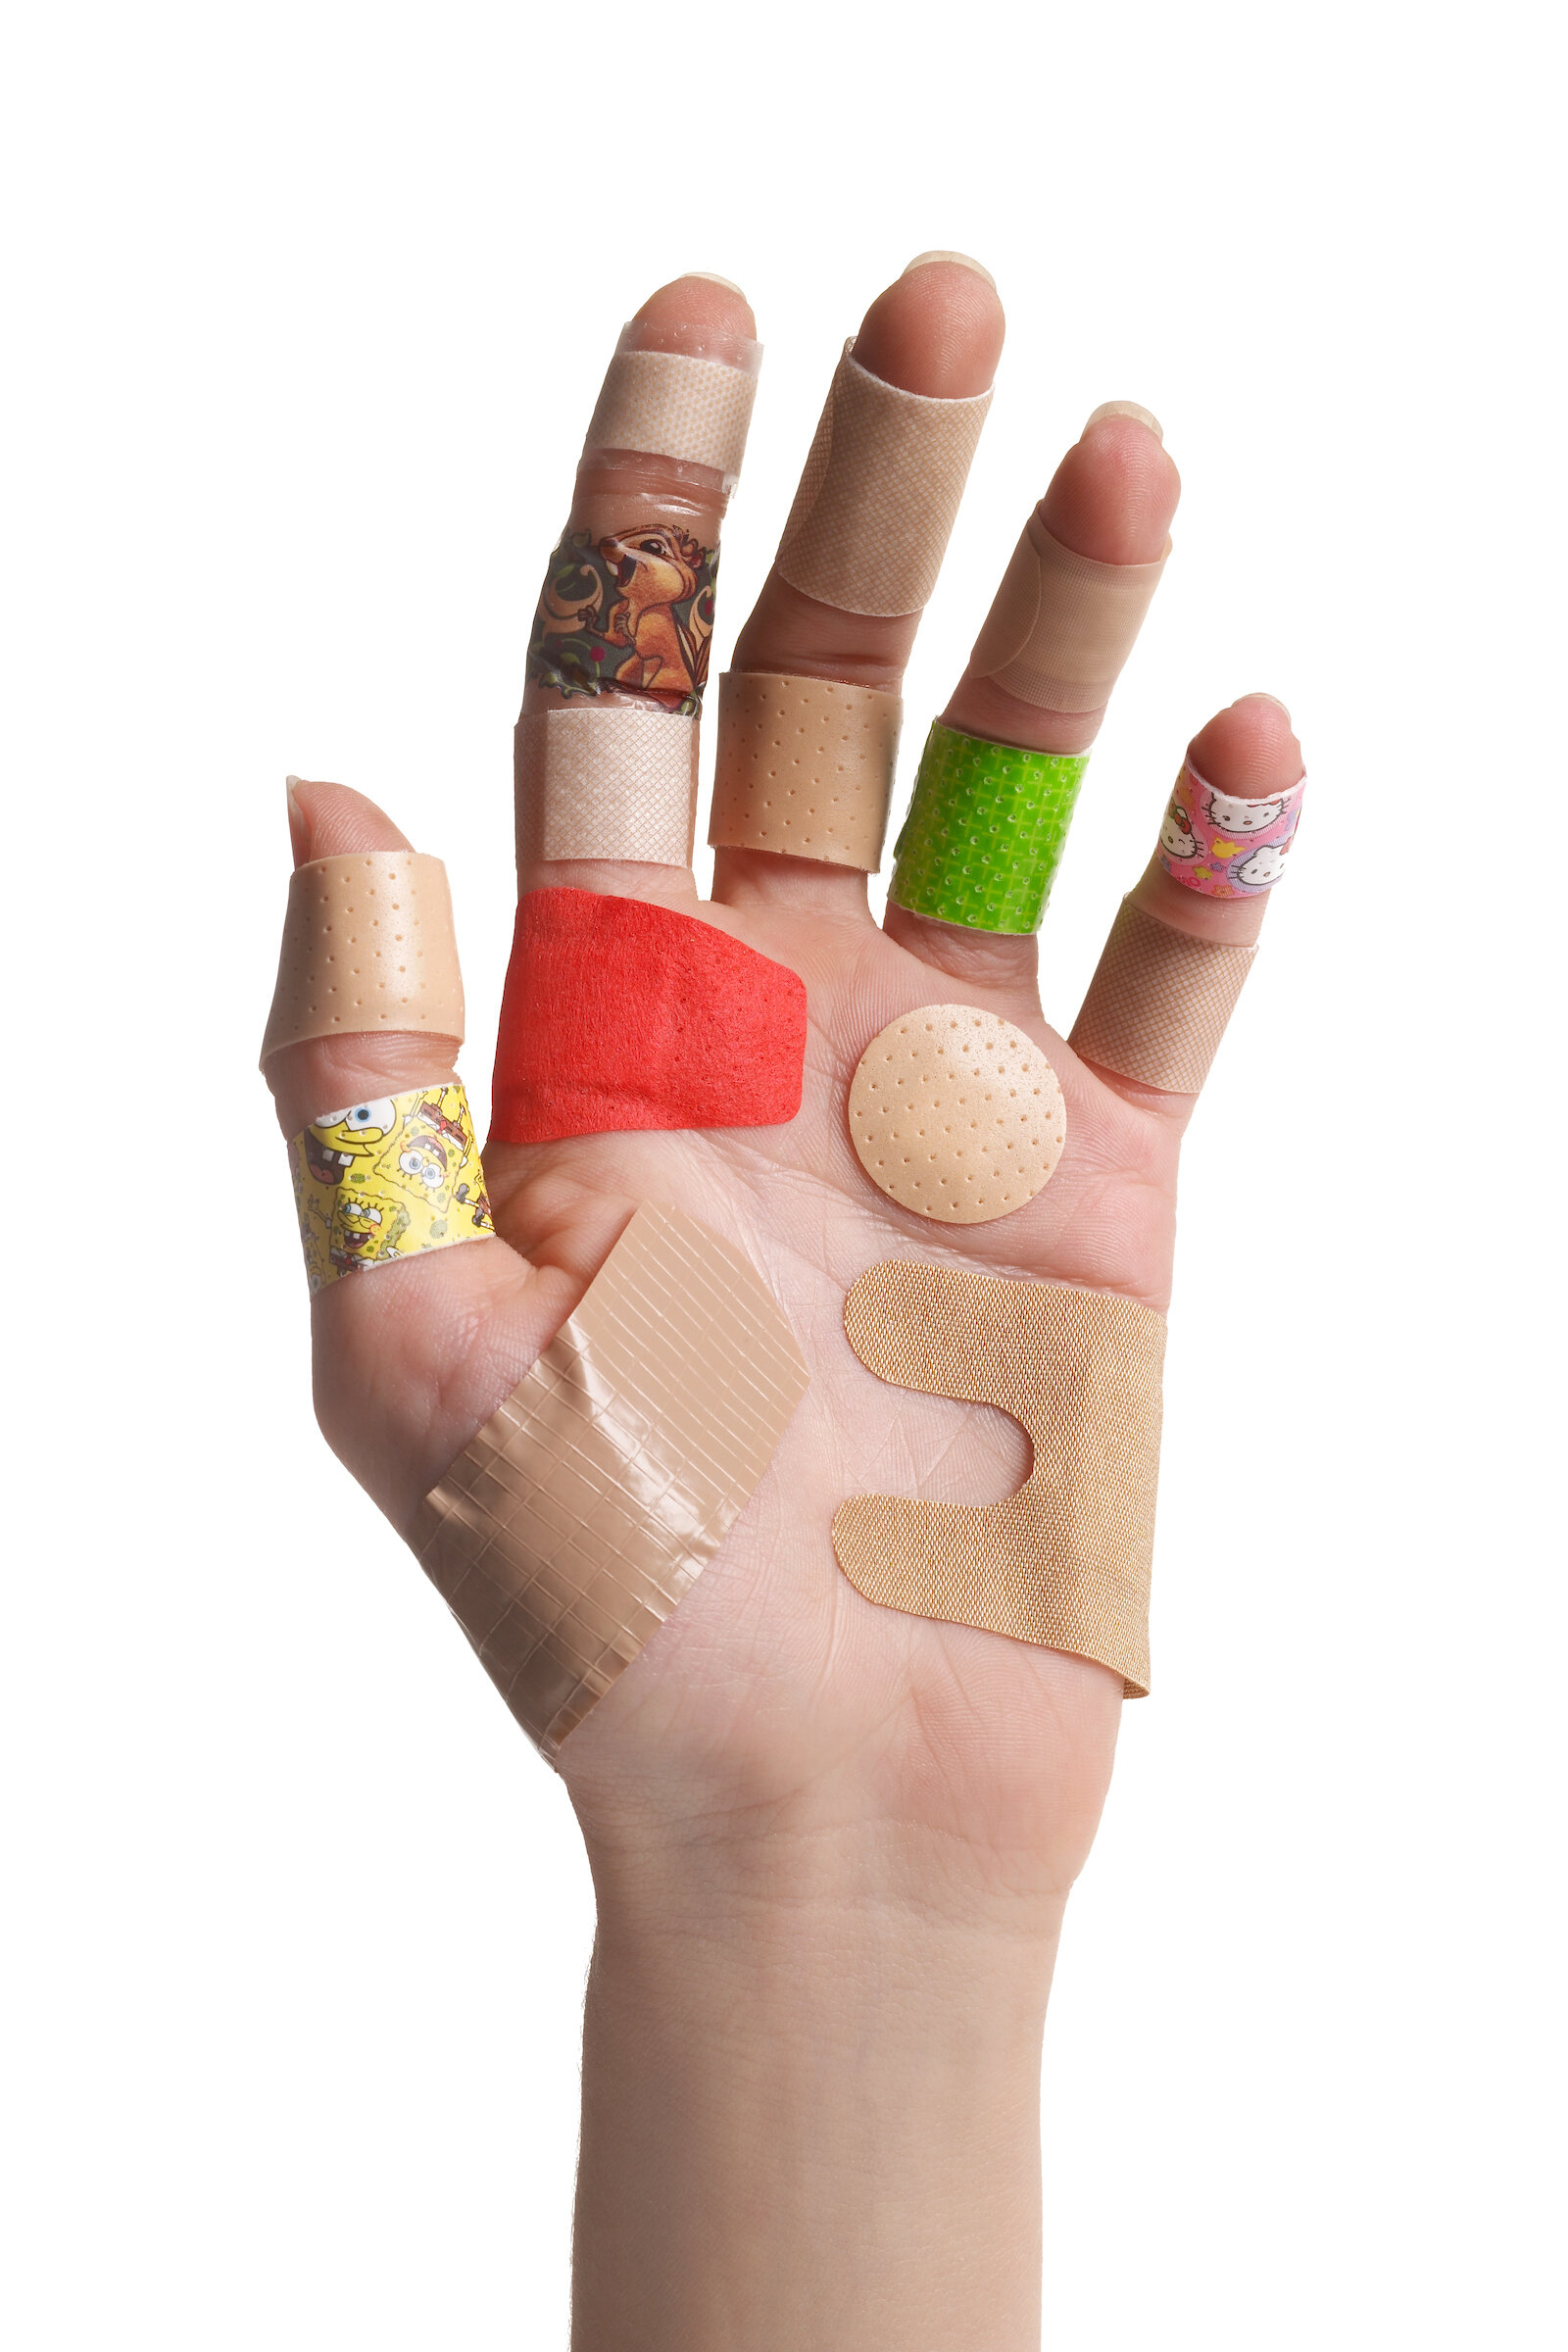 Hand with band aids.jpg